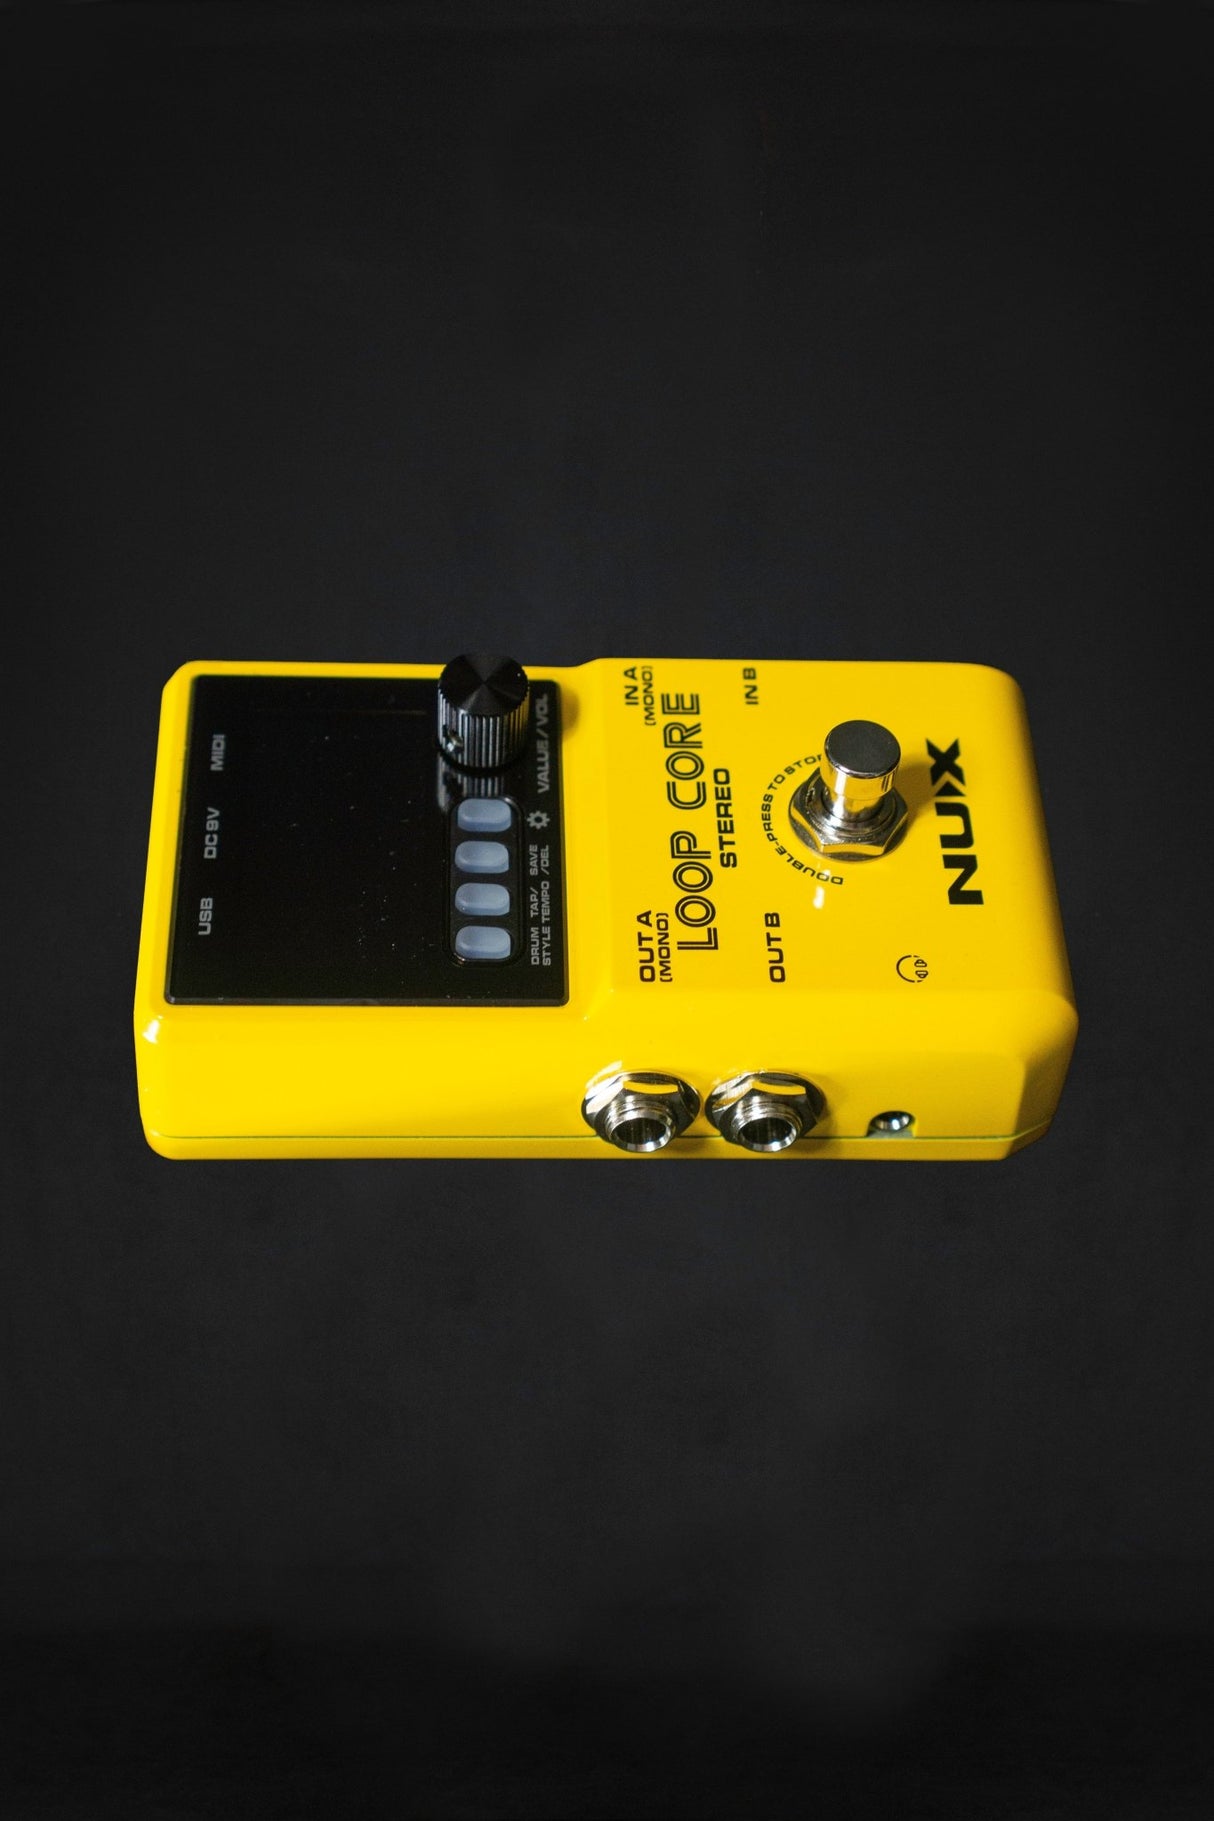 NU-X Loop Core Stereo Looper Pedal - Effect Pedals - NU-X